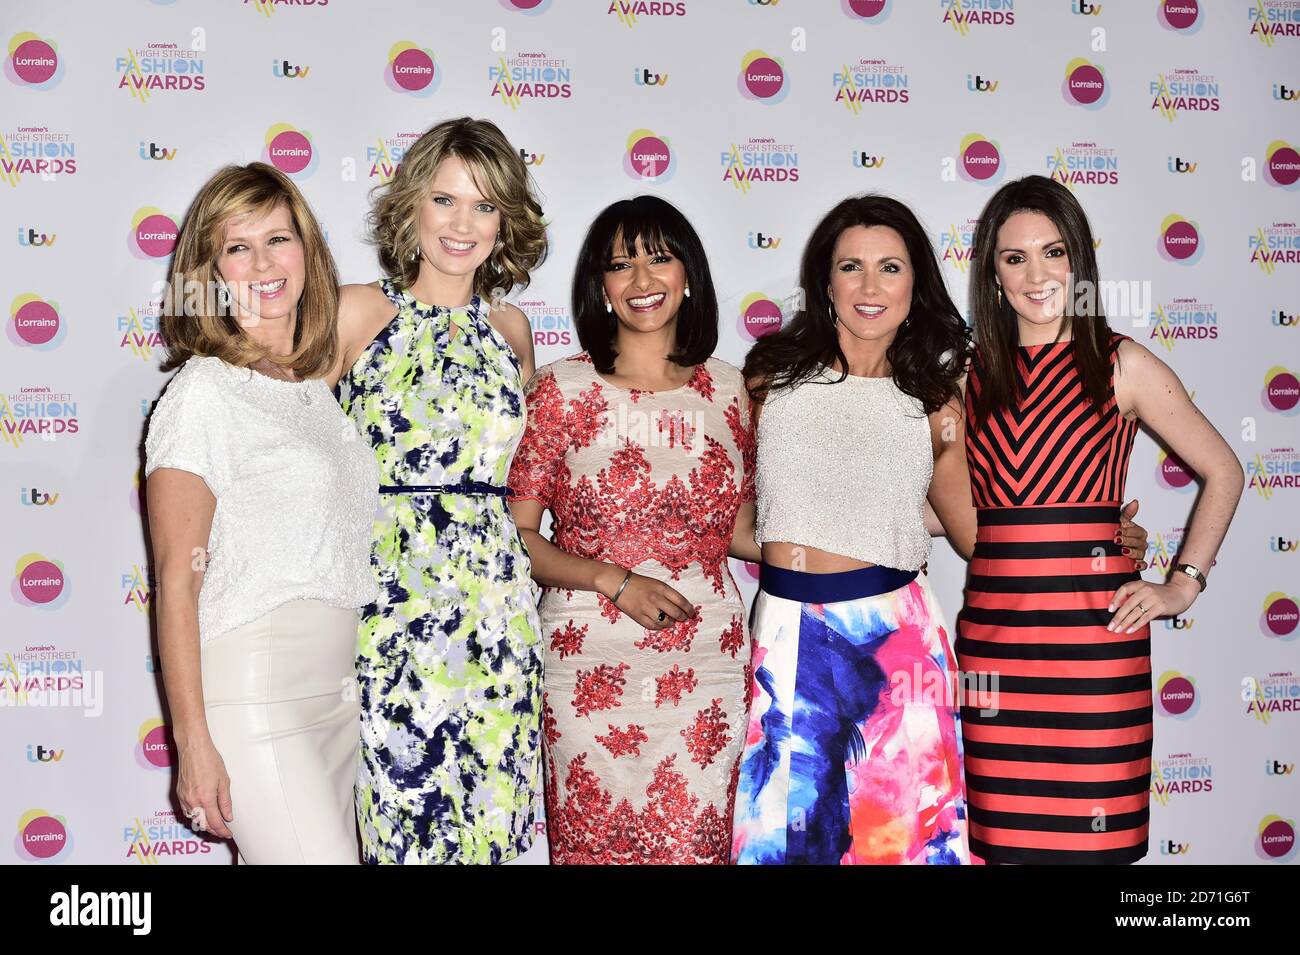 (Left - right) Kate Garraway, Charlotte Hawkins, Ranvir Singh, Susanna Reid and Laura Tobin attending Lorraine's High Street Fashion Awards, at the Connaught Rooms in London Stock Photo